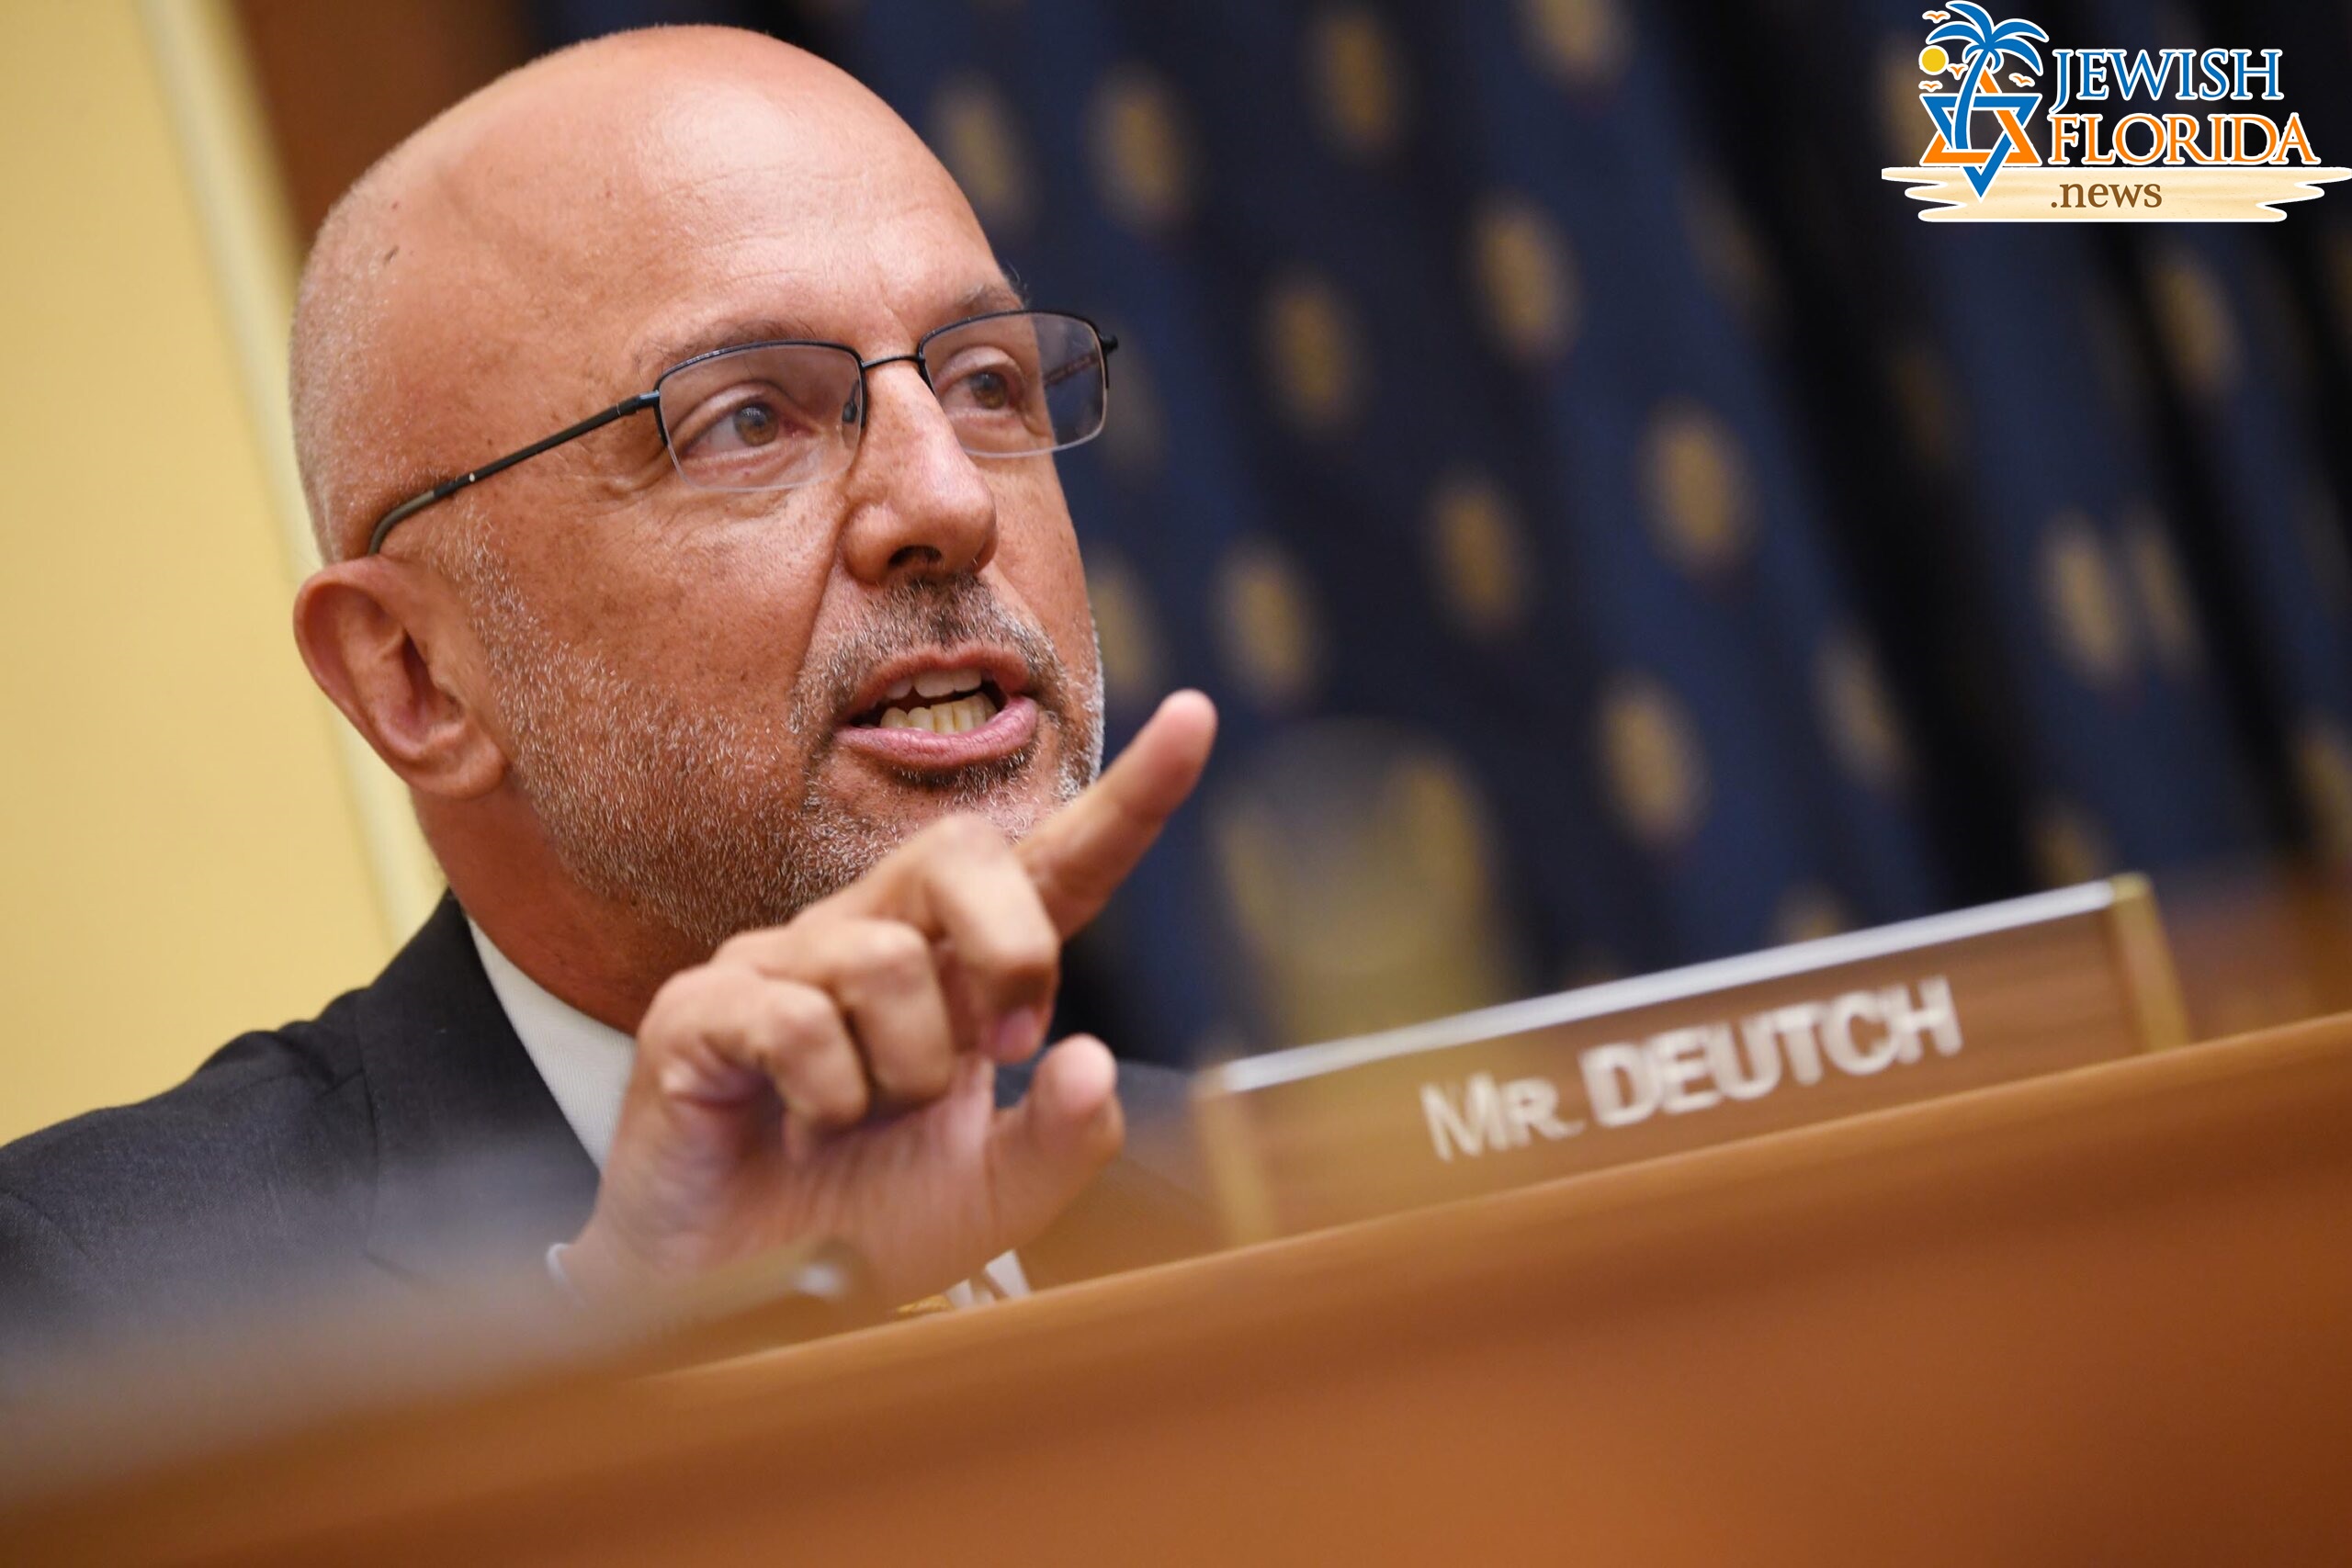 Ted Deutch to resign from Congress to lead American Jewish Committee